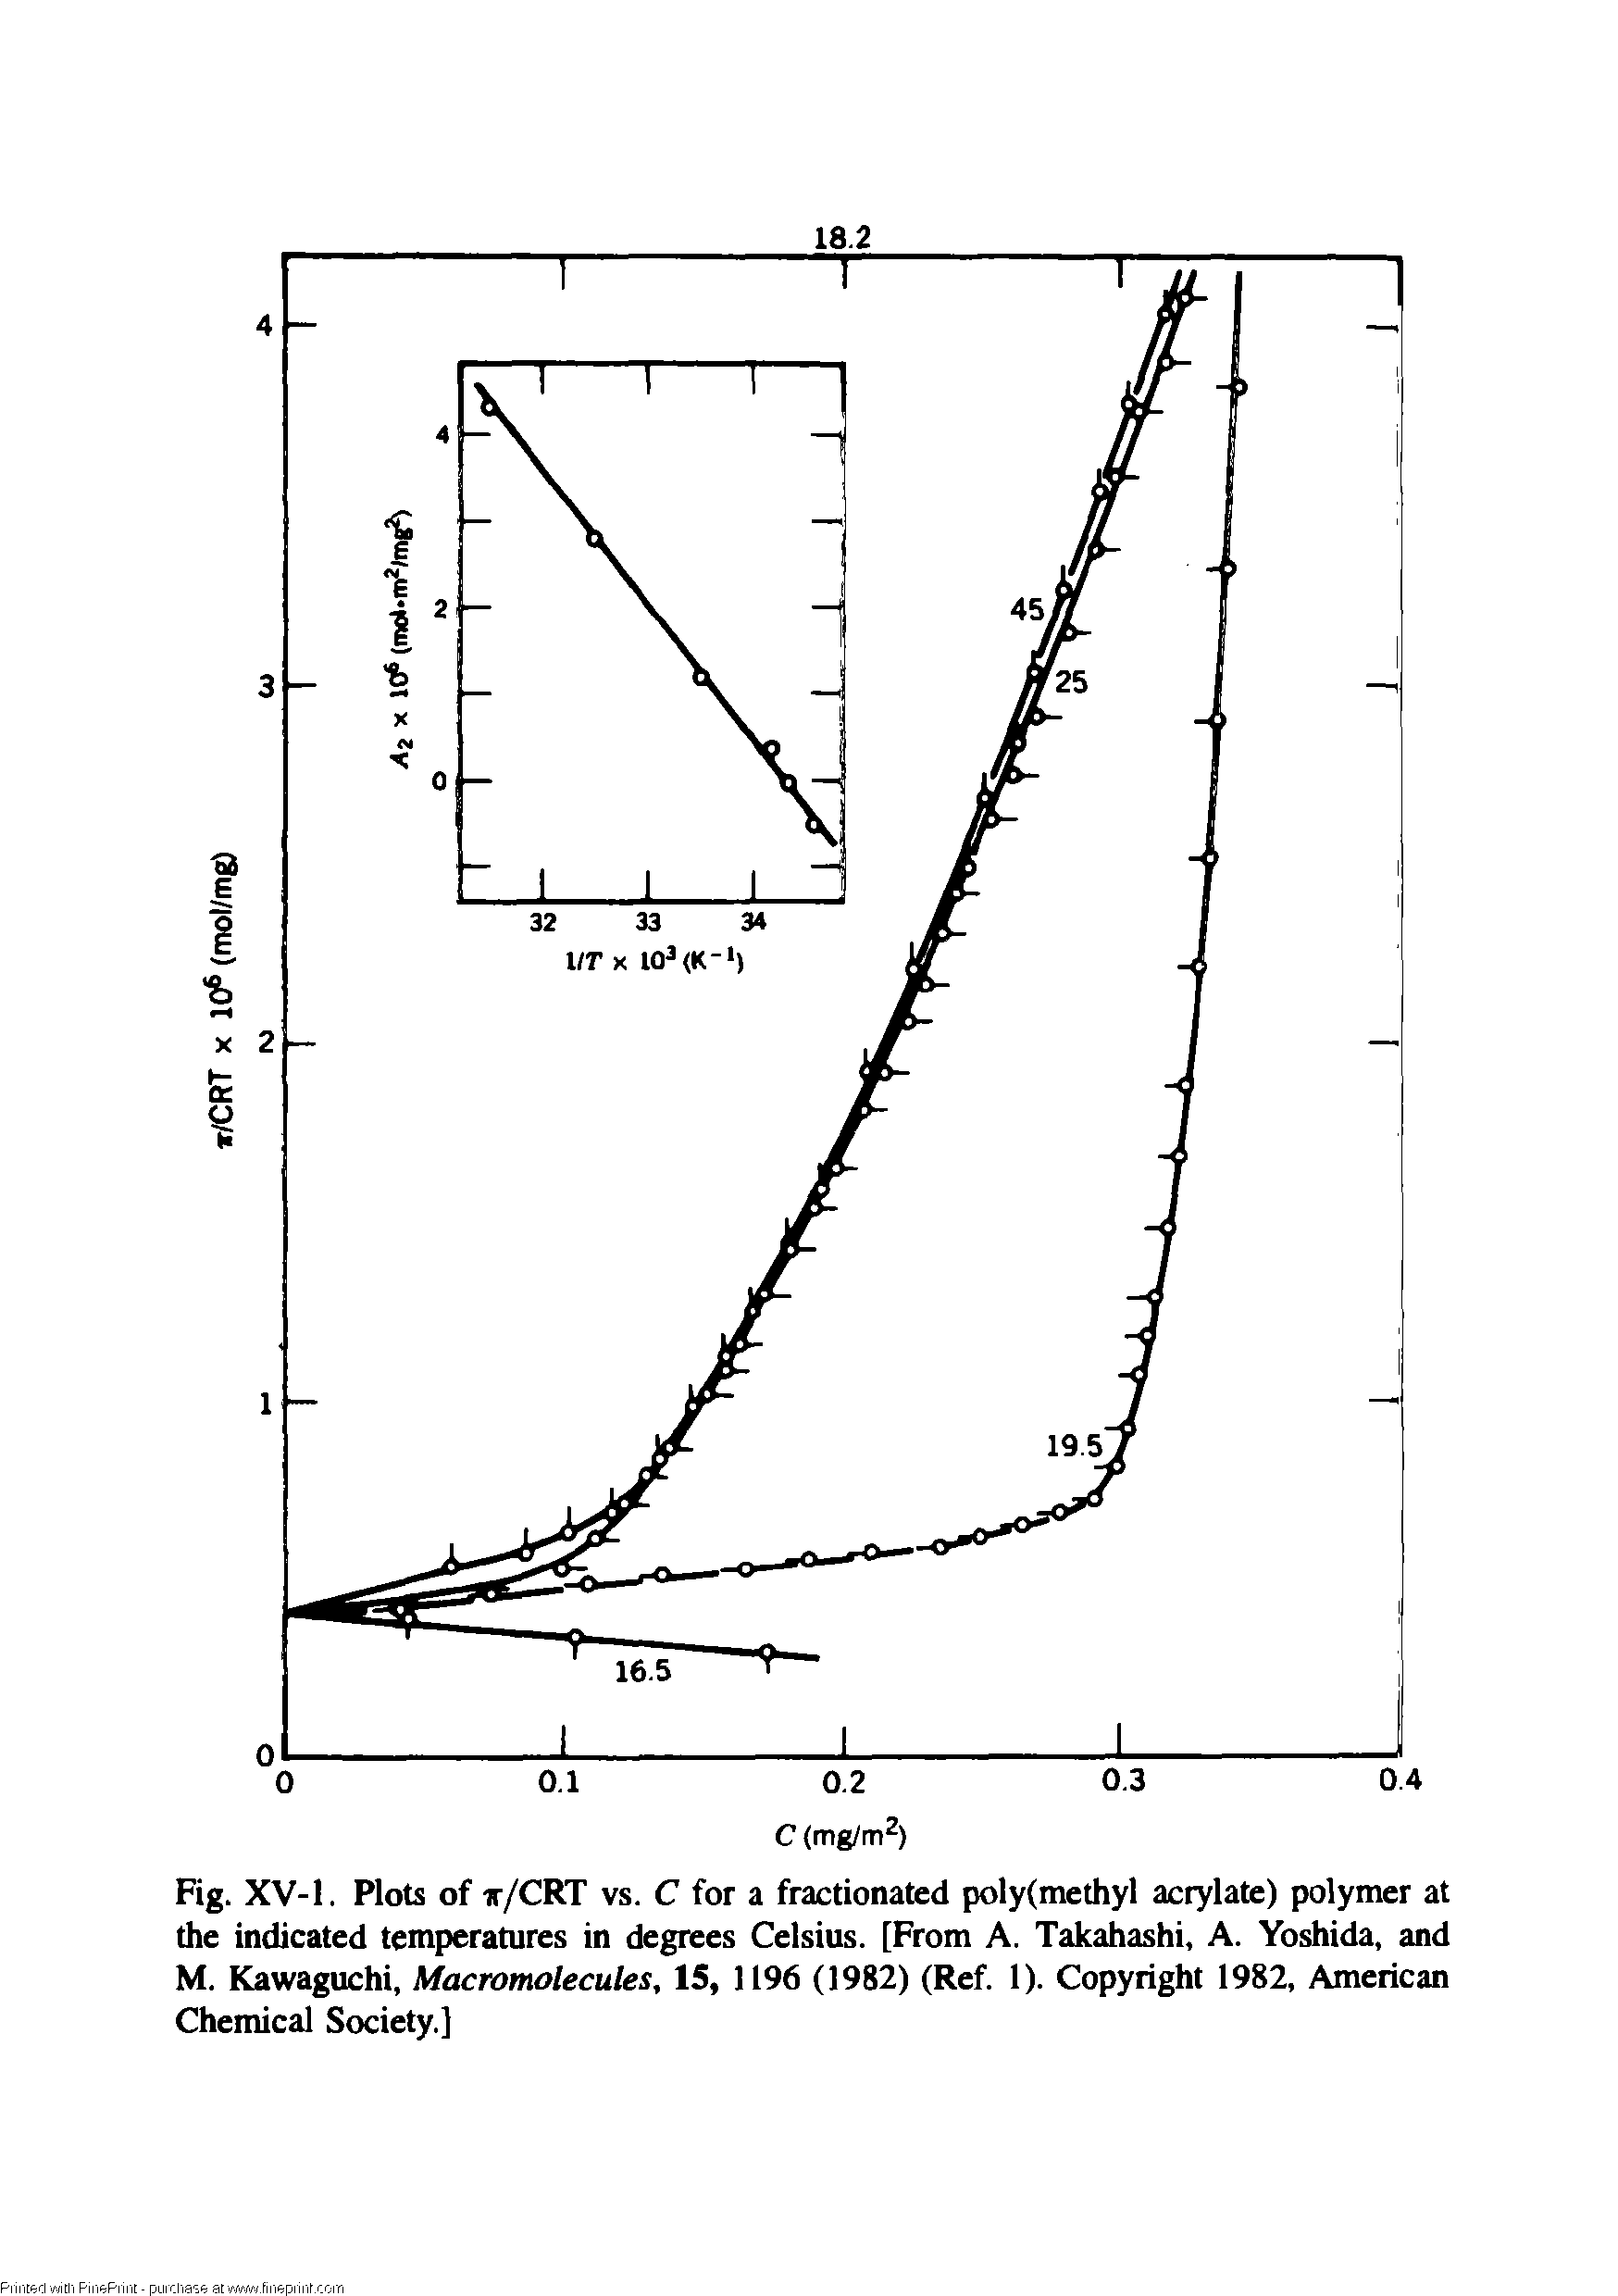 Fig. XV-1. Plots of t/CRT vs. C for a fractionated poly(methyl acrylate) polymer at the indicated temperatures in degrees Celsius. [From A. Takahashi, A. Yoshida, and M. Kawaguchi, Macromolecules, 15, 1196 (1982) (Ref. 1). Copyright 1982, American Chemical Society.]...